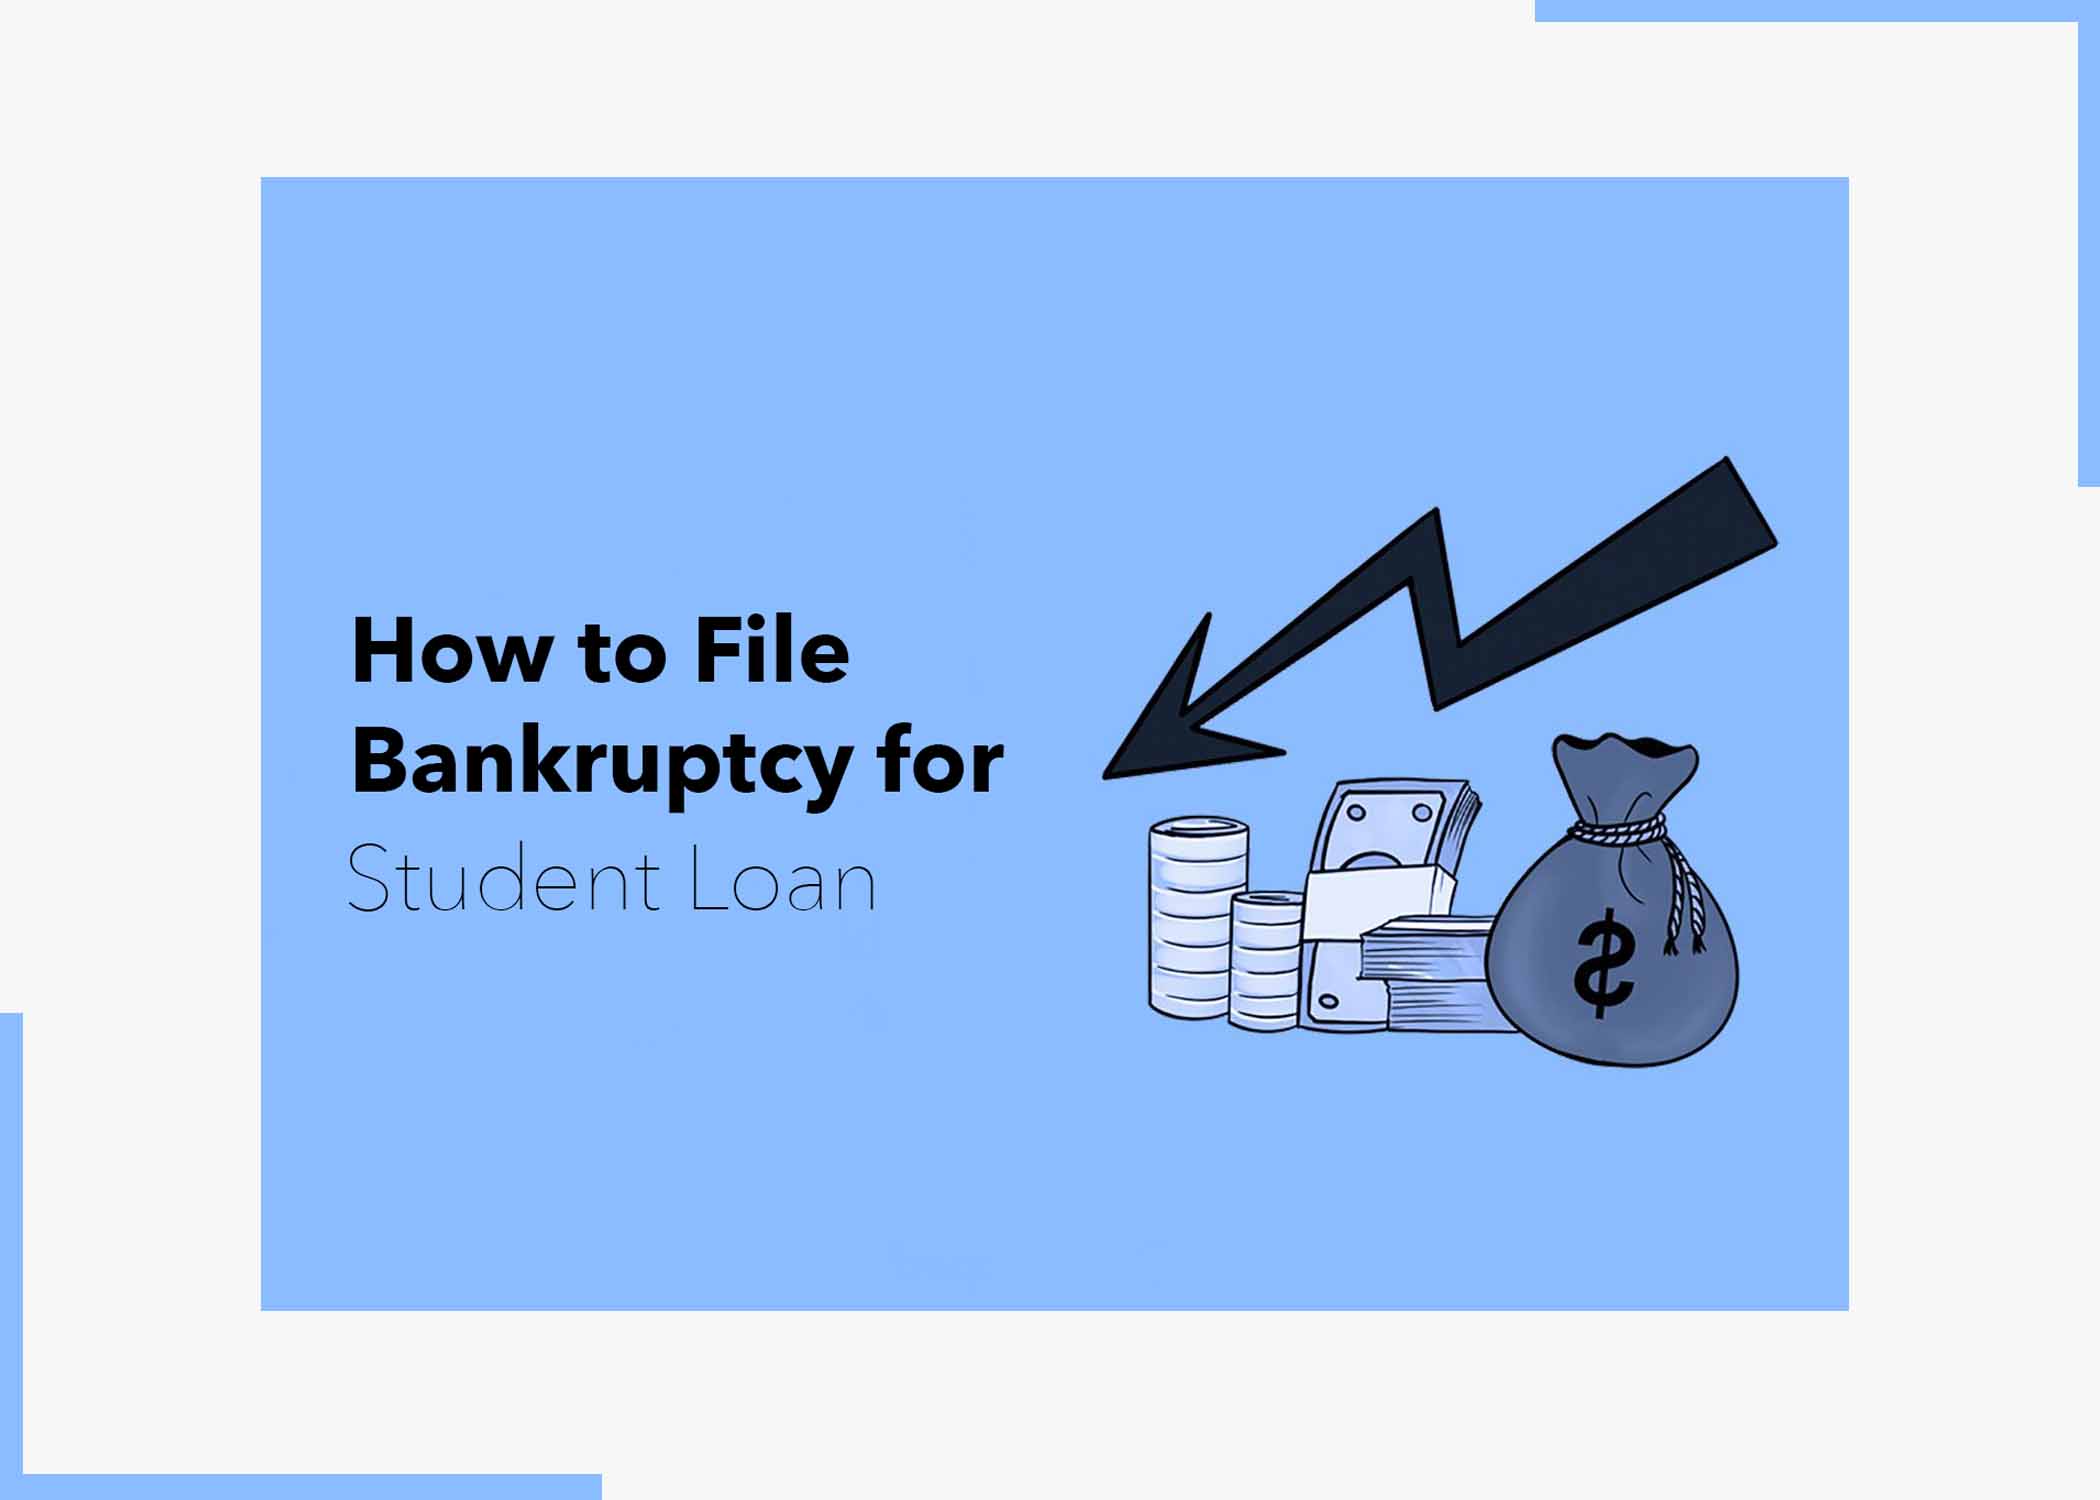 How to File Bankruptcy for Student Loan